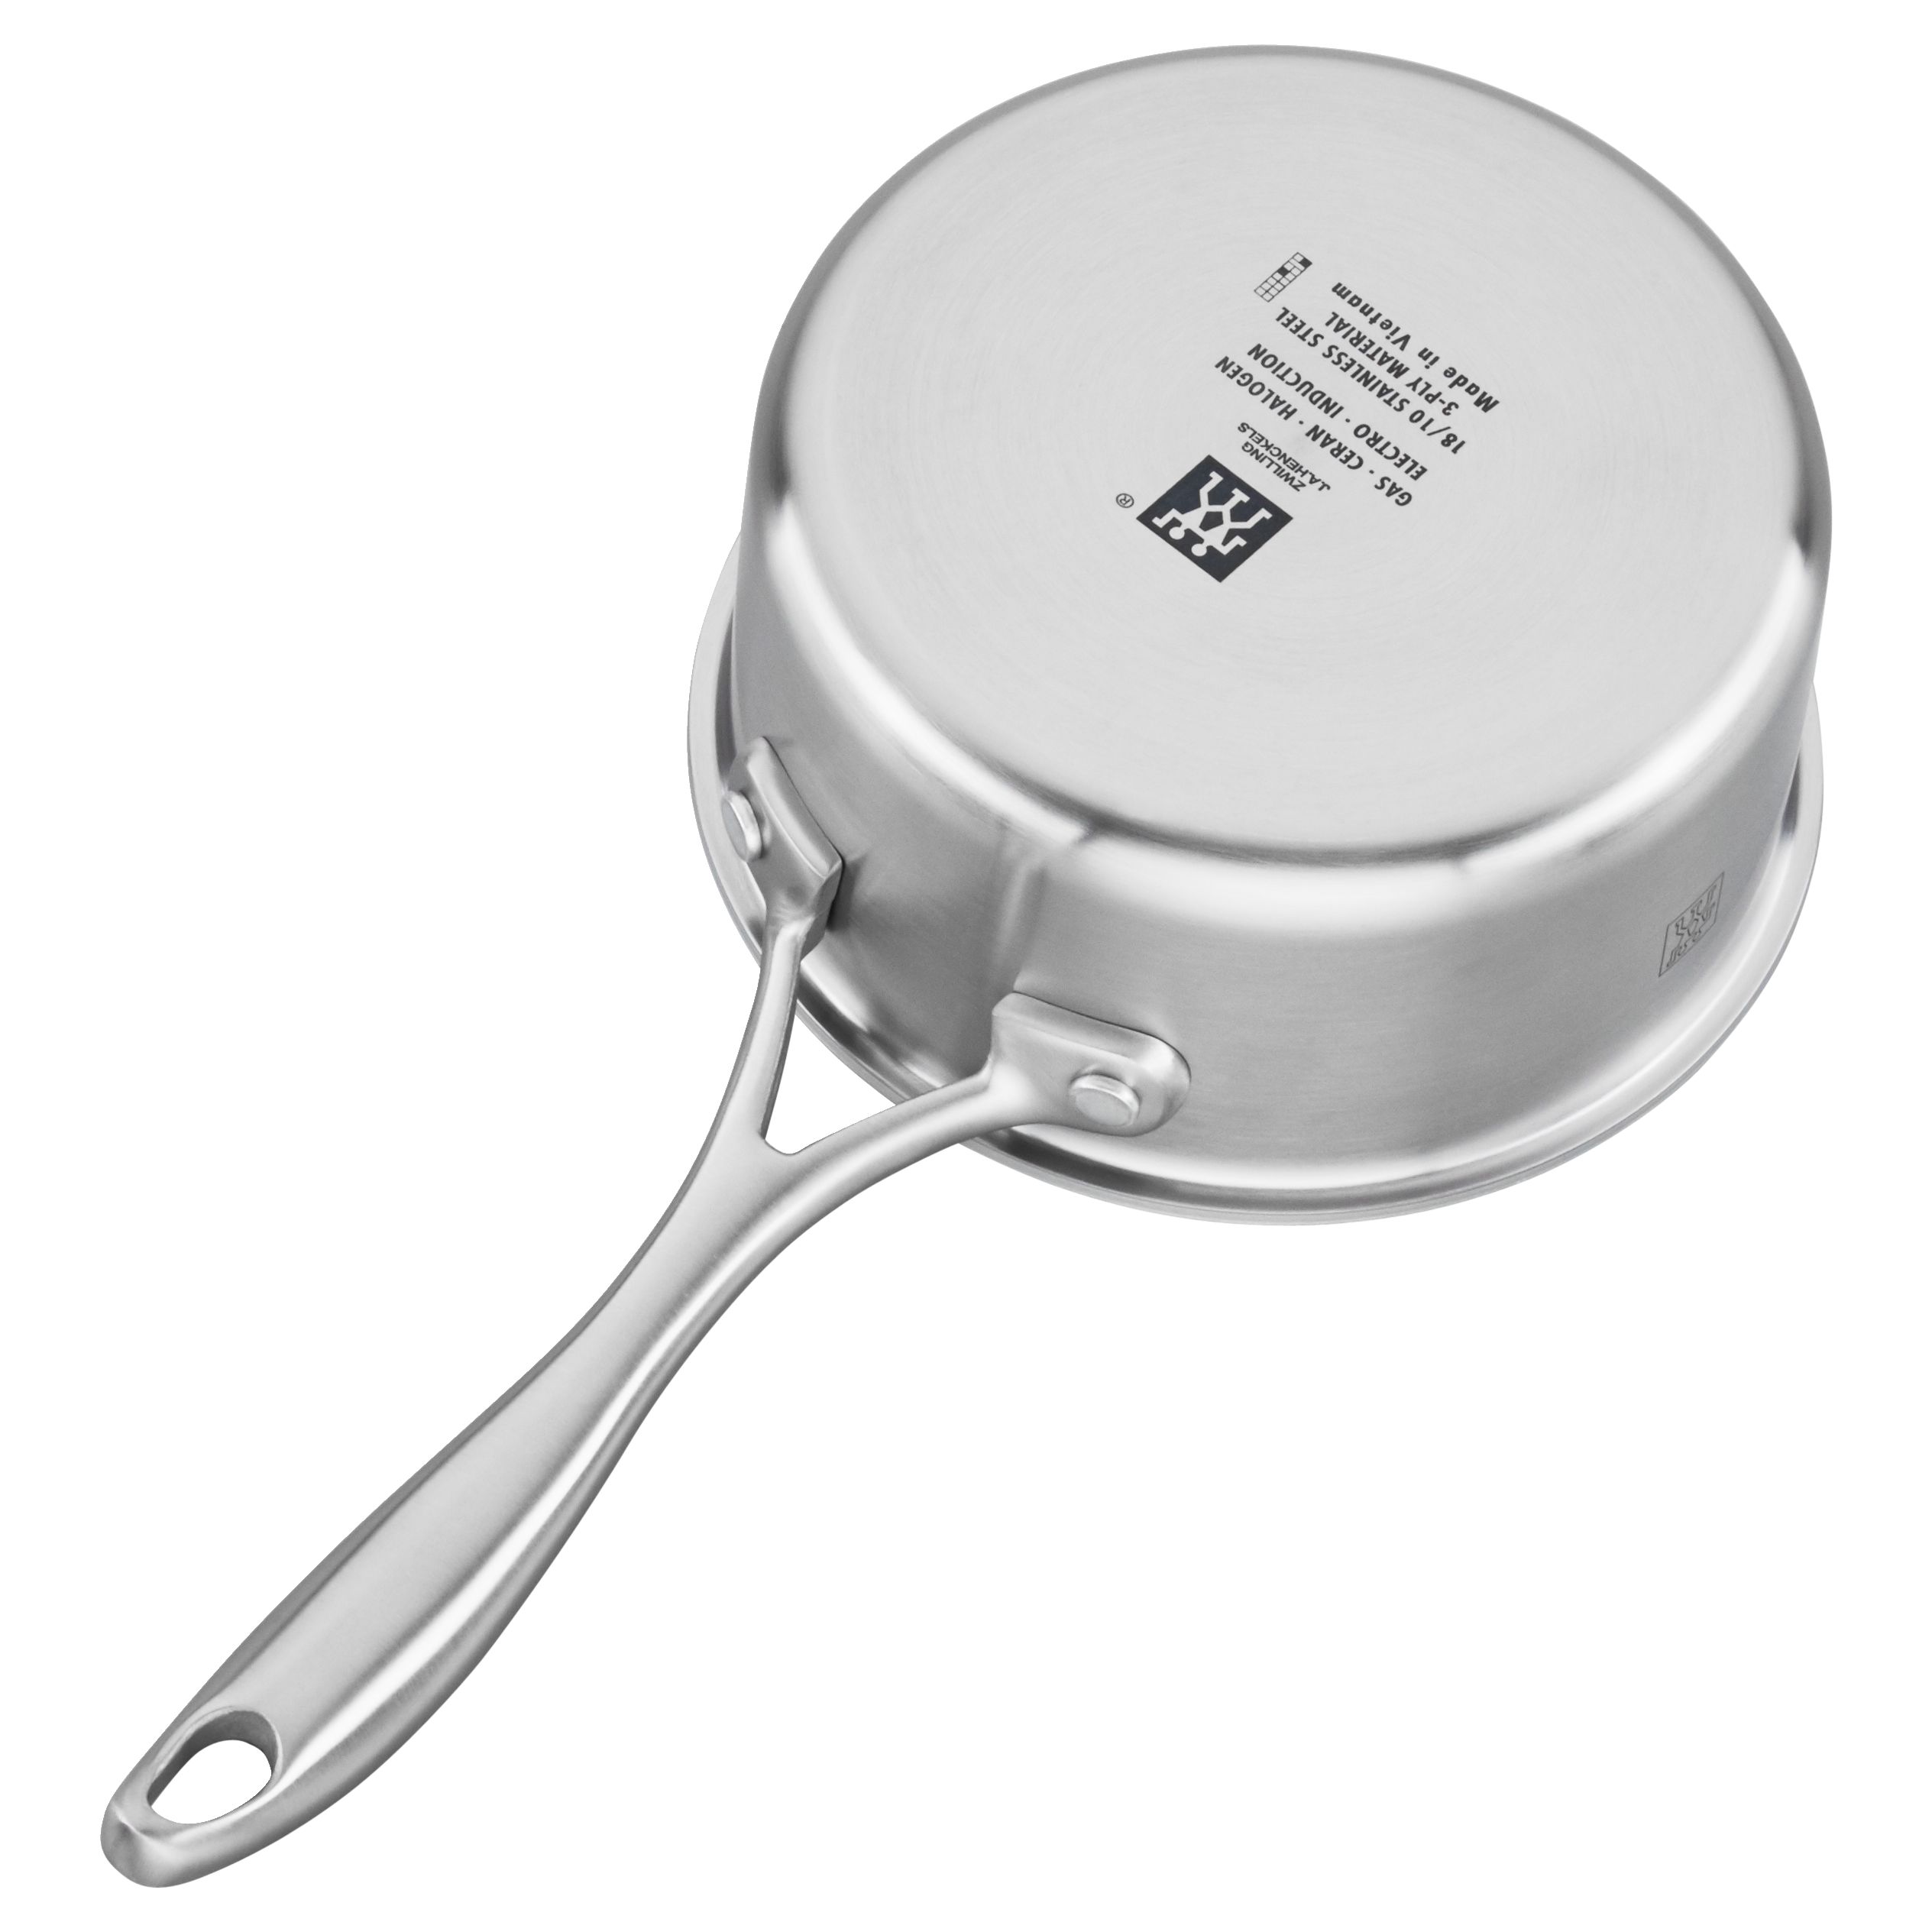 Zwilling Spirit 3-Ply 1 qt, Stainless Steel, Sauce Pan